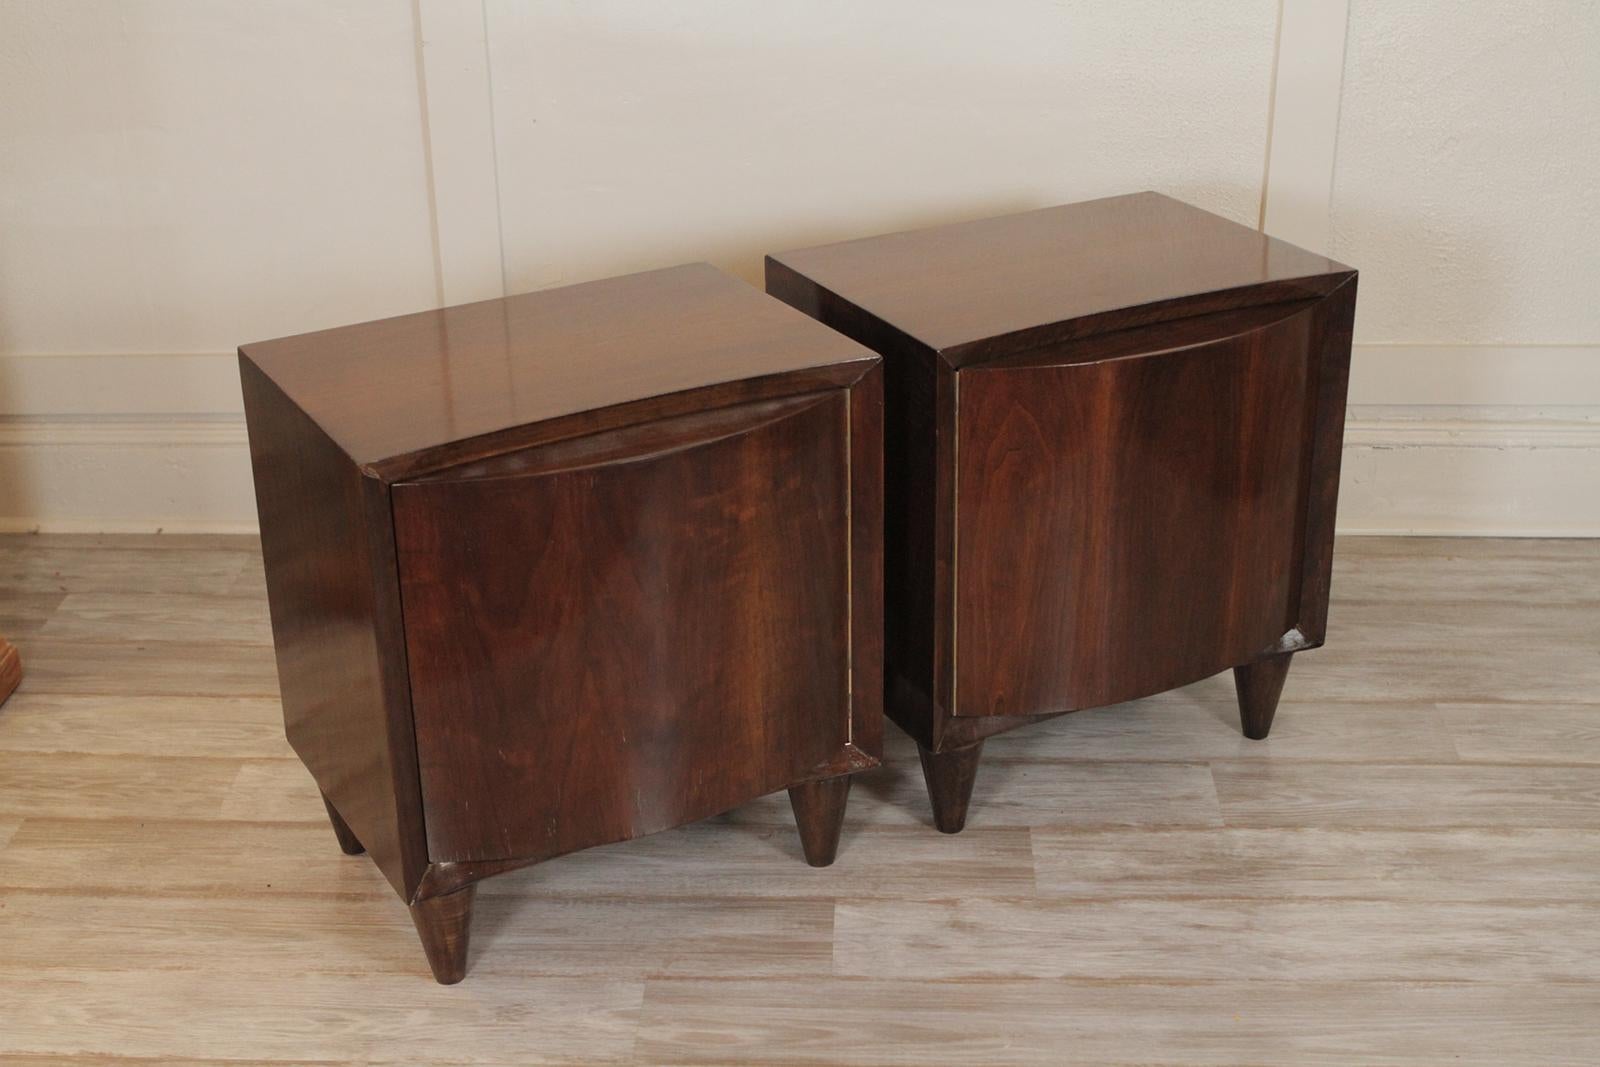 Mid-Century Modern pair of walnut side or end tables. The figurative grained curved door fronts open to reveal a shelved storage area. The outside case in a neat cube form resting of four tapering legs. Dimensions 22” W x 18.5